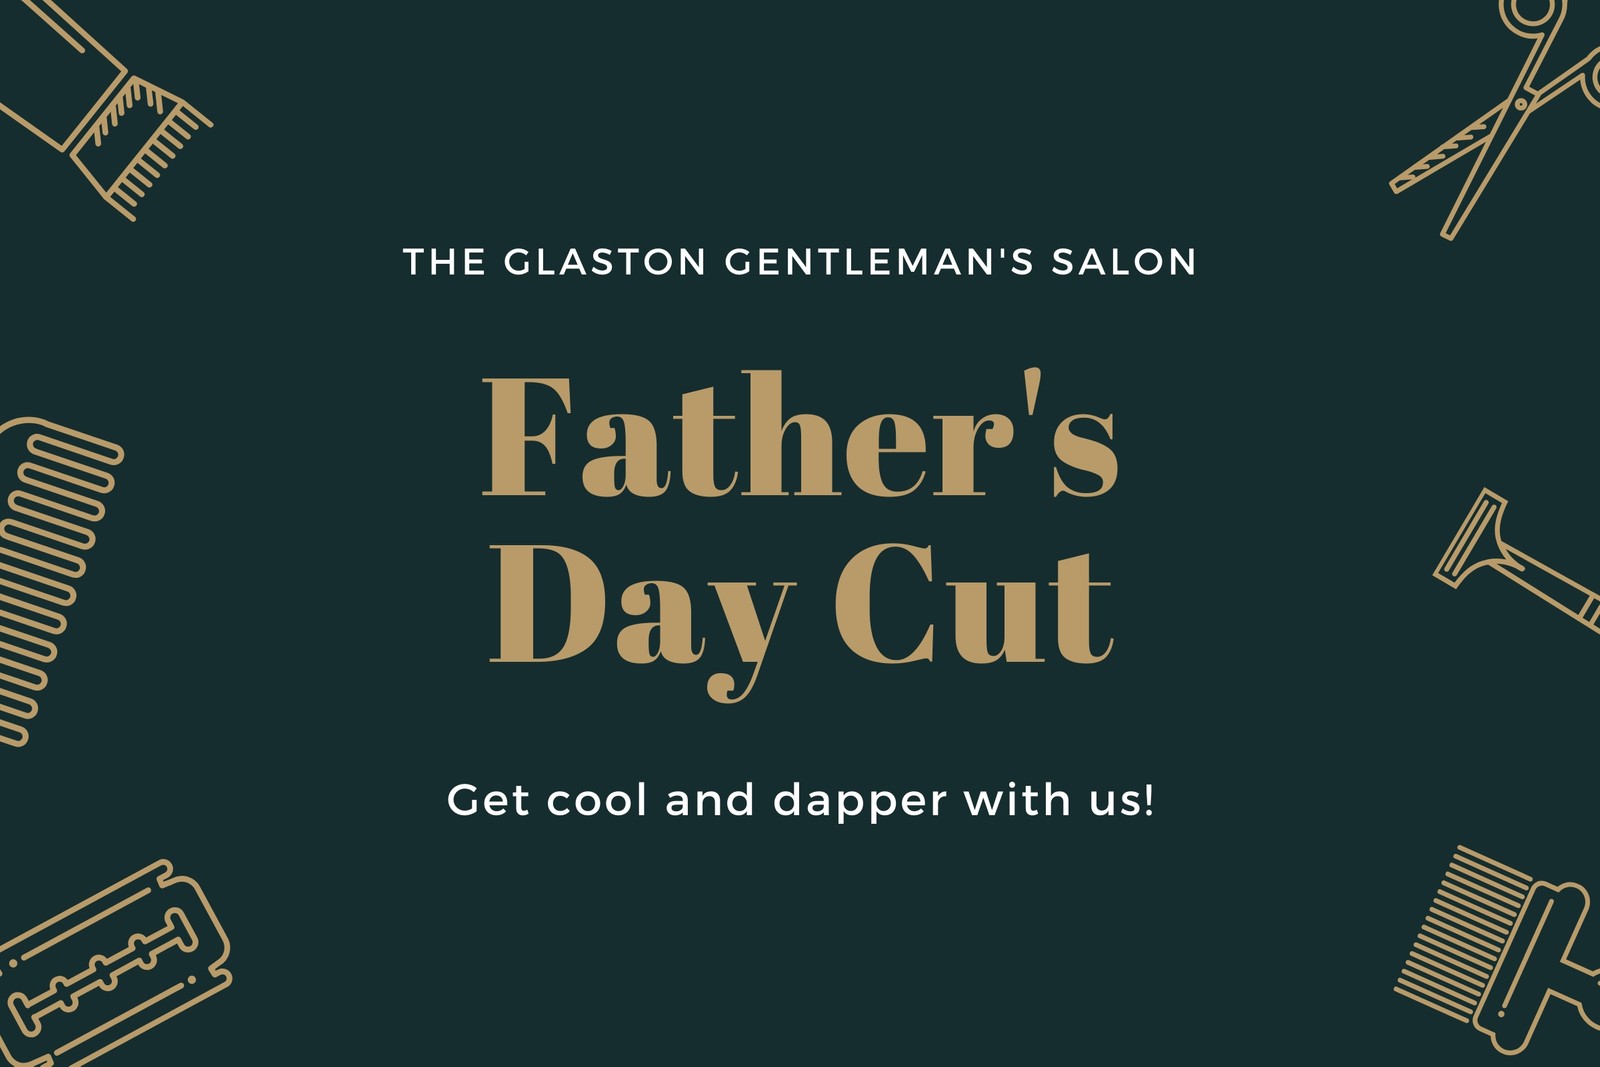 Father's Day Gift Card Specials 